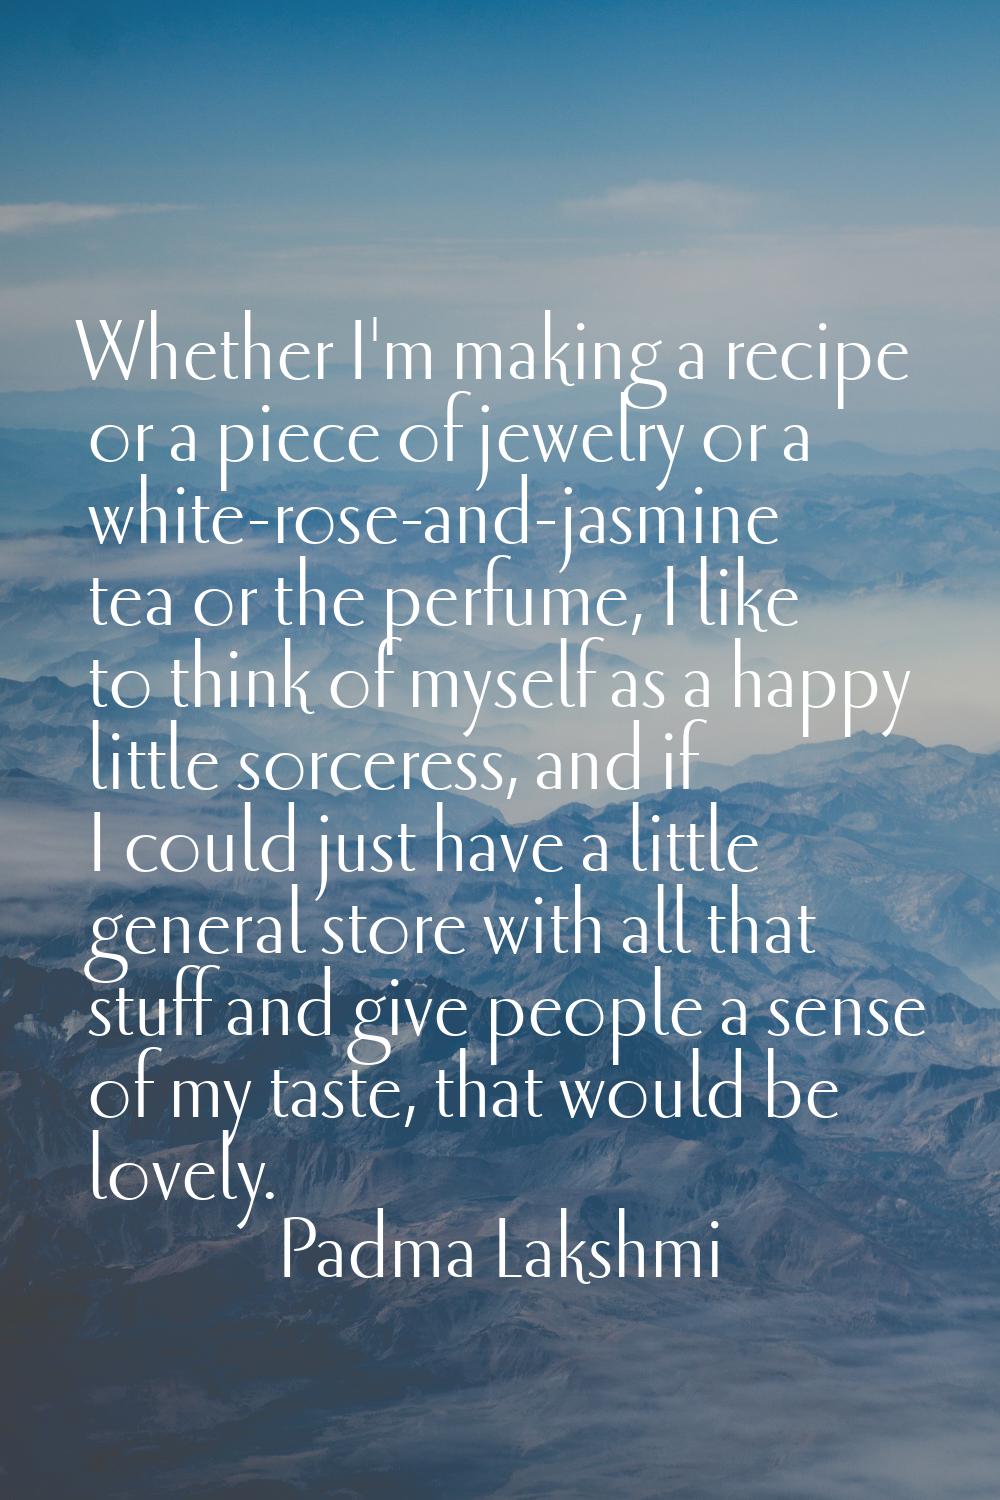 Whether I'm making a recipe or a piece of jewelry or a white-rose-and-jasmine tea or the perfume, I